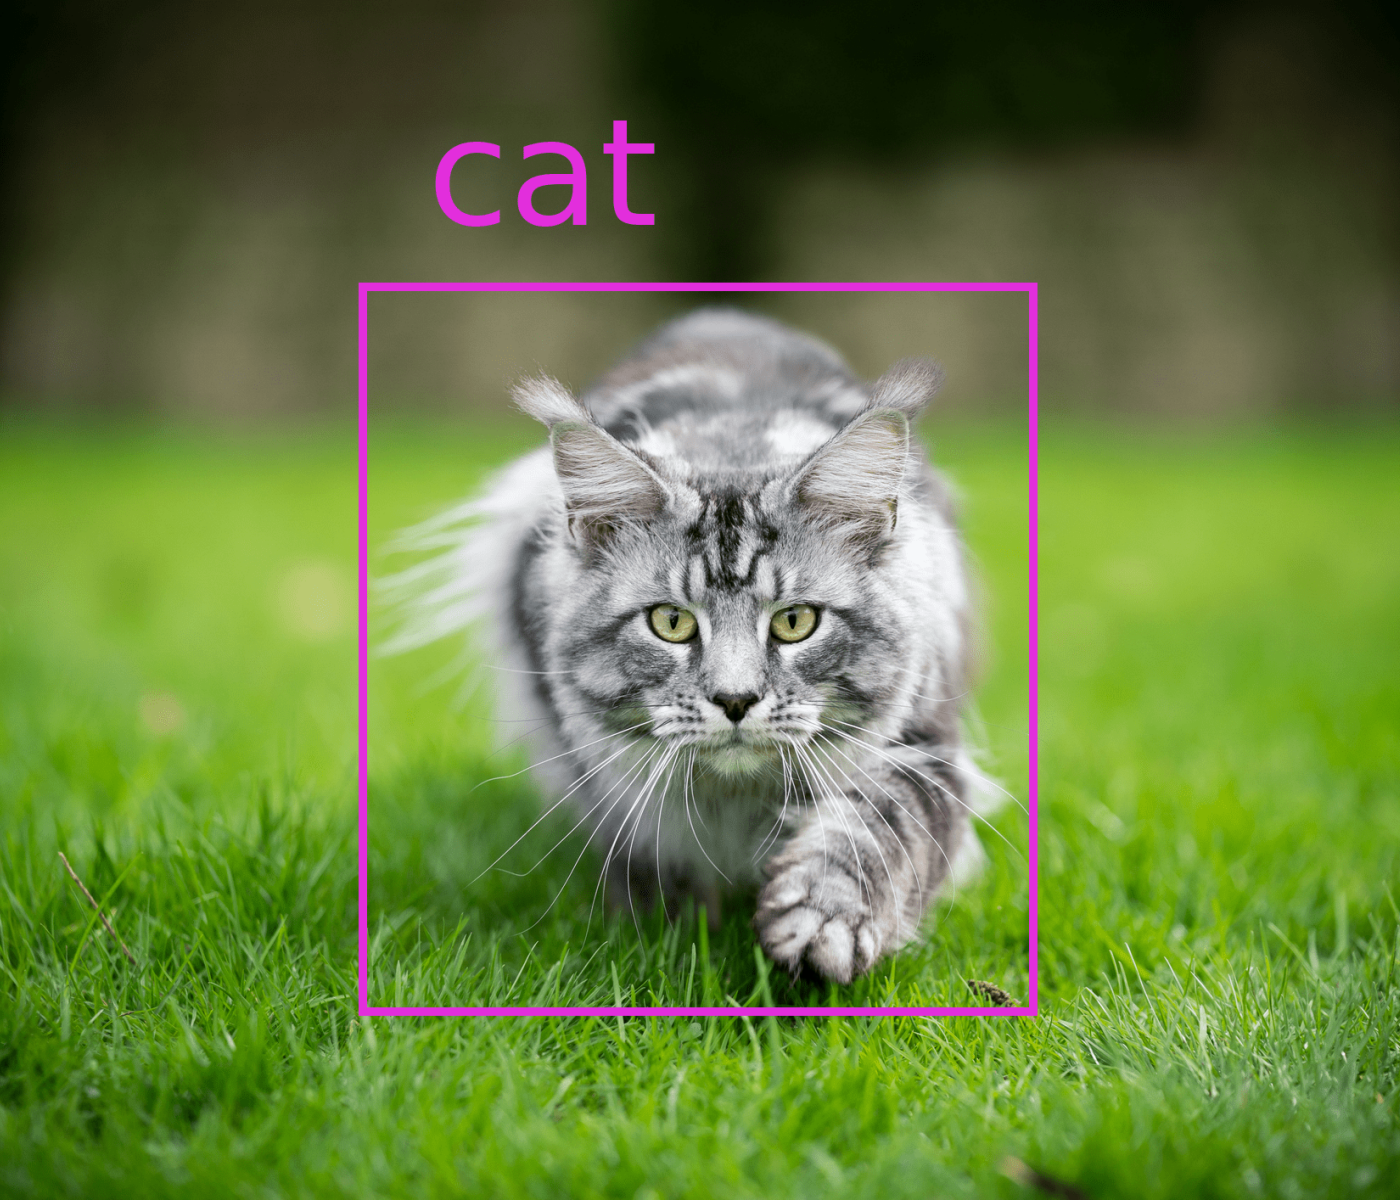 Labeling of a cat in an image